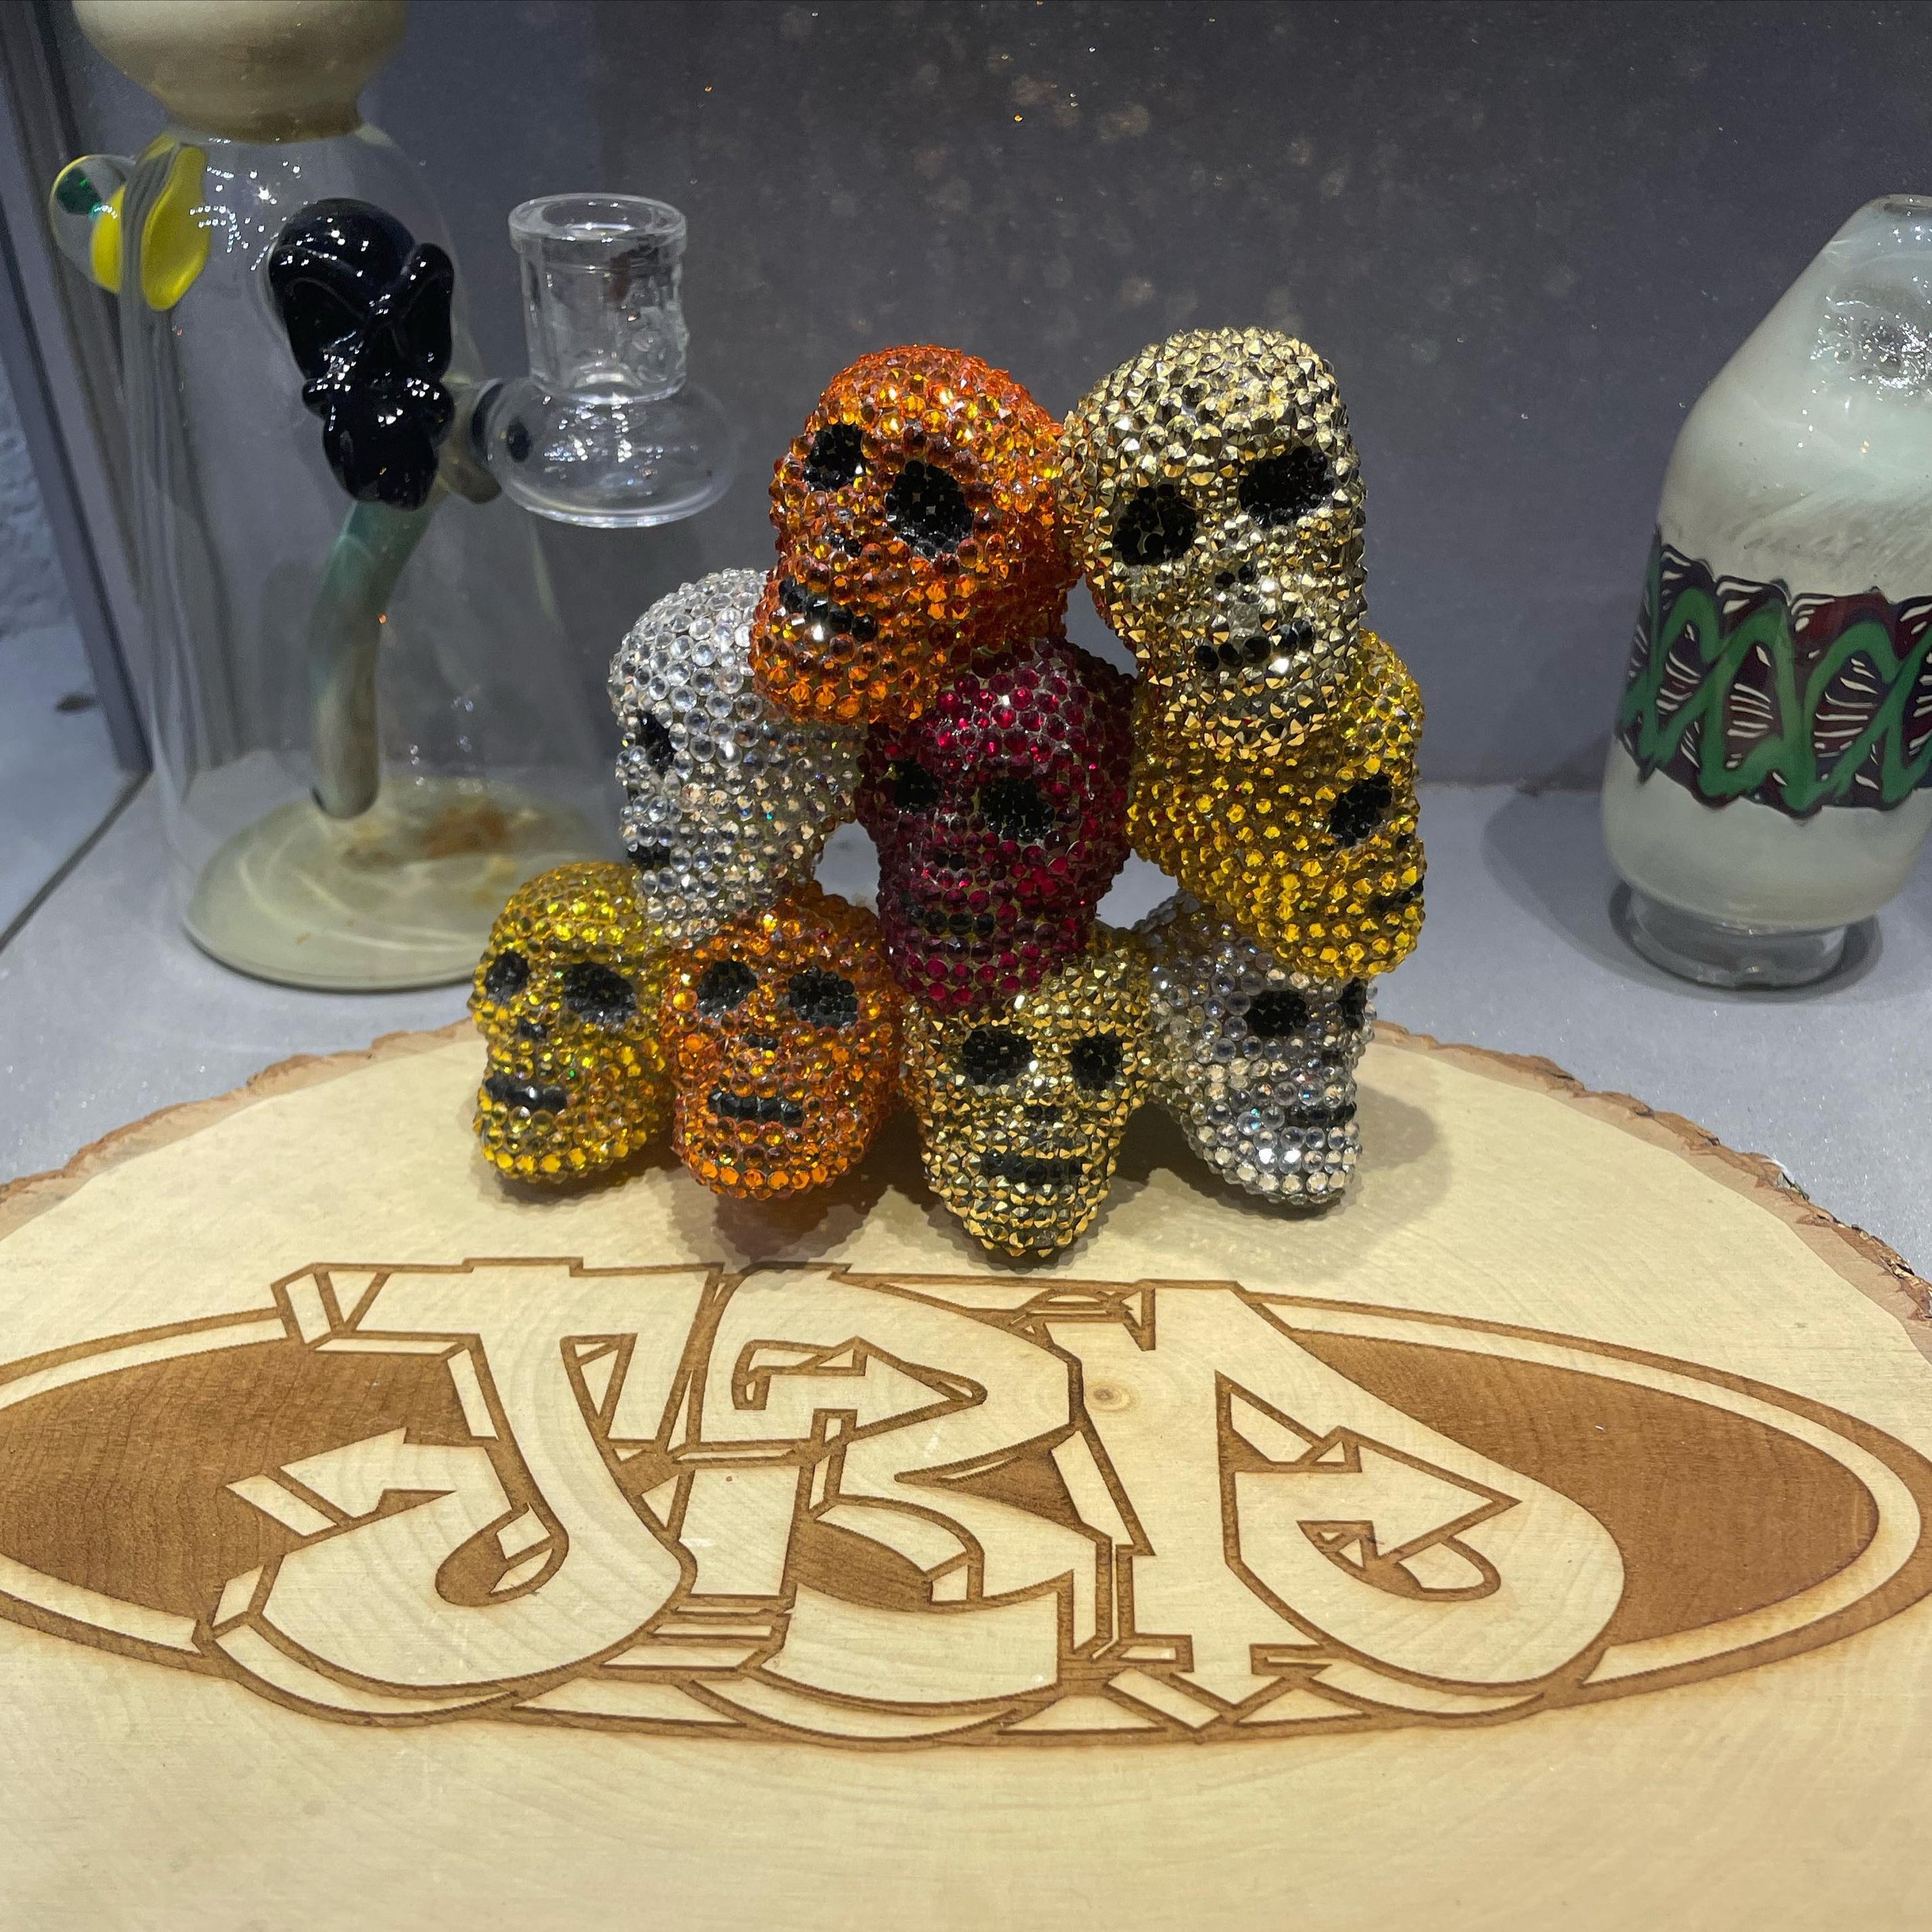 Happy 4/20!! We just stopped by @jeromes_baker to see their chill and workshop and raffle off one of their amazing pieces!  We are huge fans of these glass designers! A few more 4/20 stops to go before we end at the NUWU carnival!